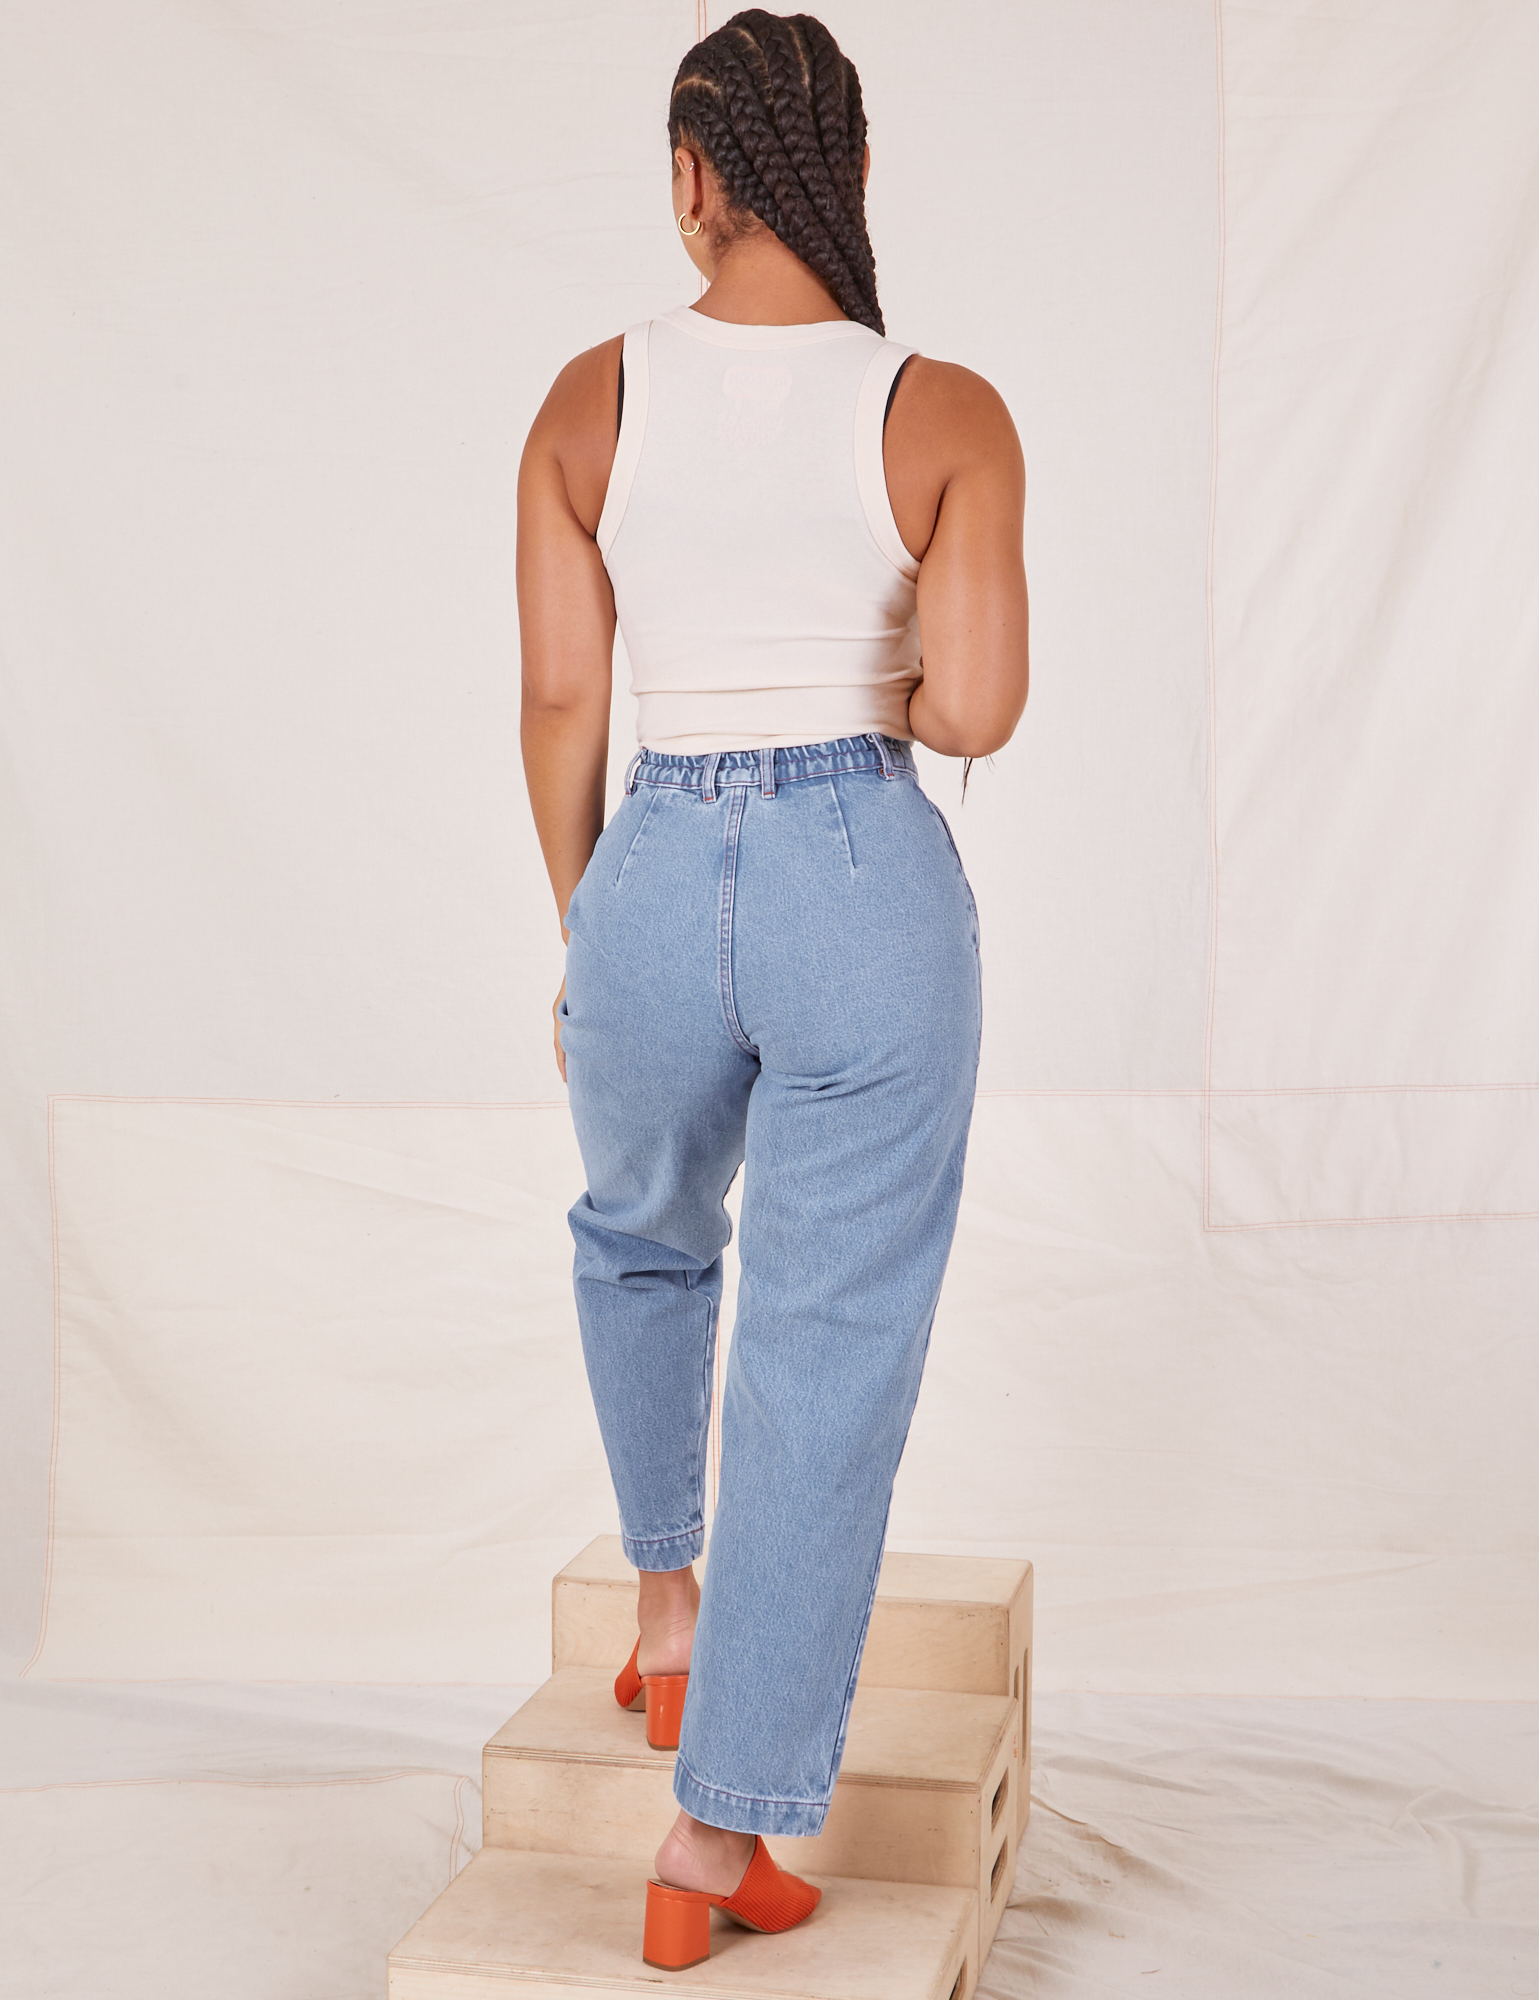 Back view of Denim Trouser Jeans in Light Wash and vintage off-white Tank Top worn by Gabi